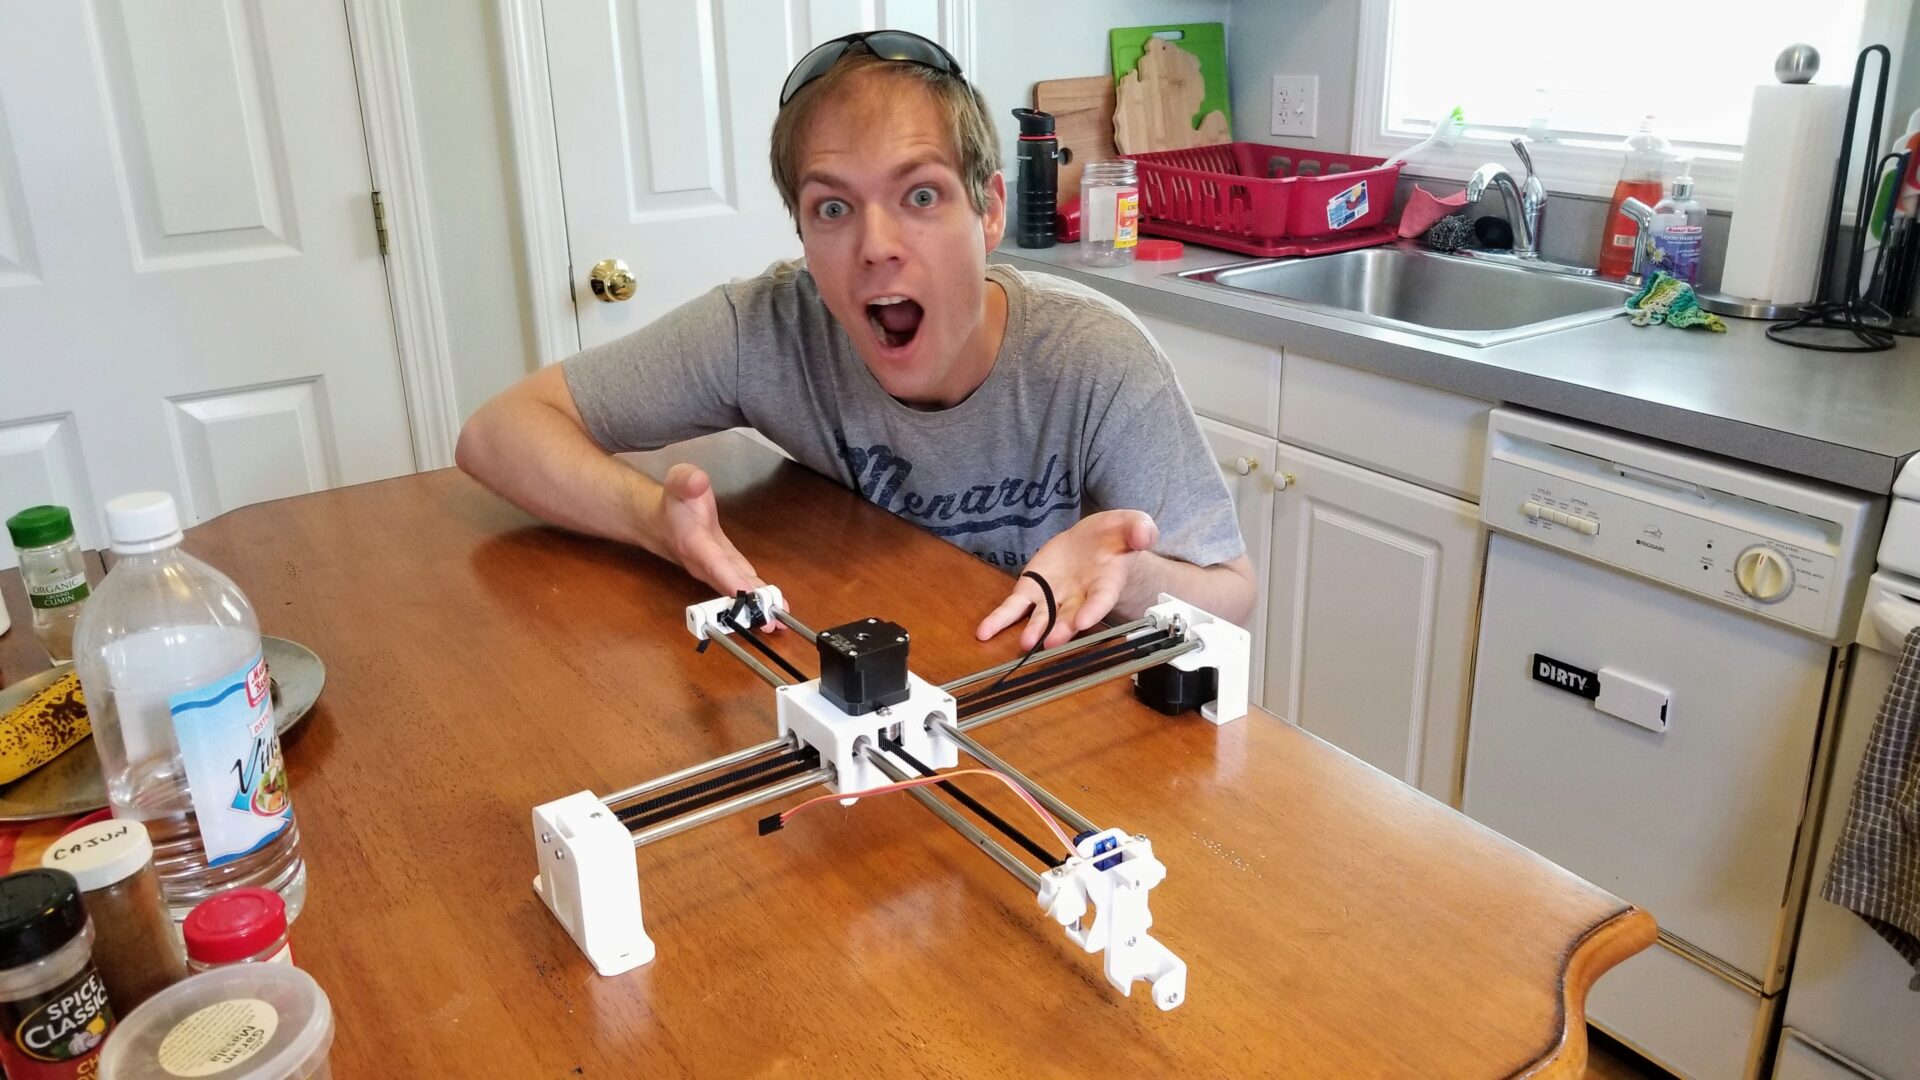 Clark with fully assembled plotter